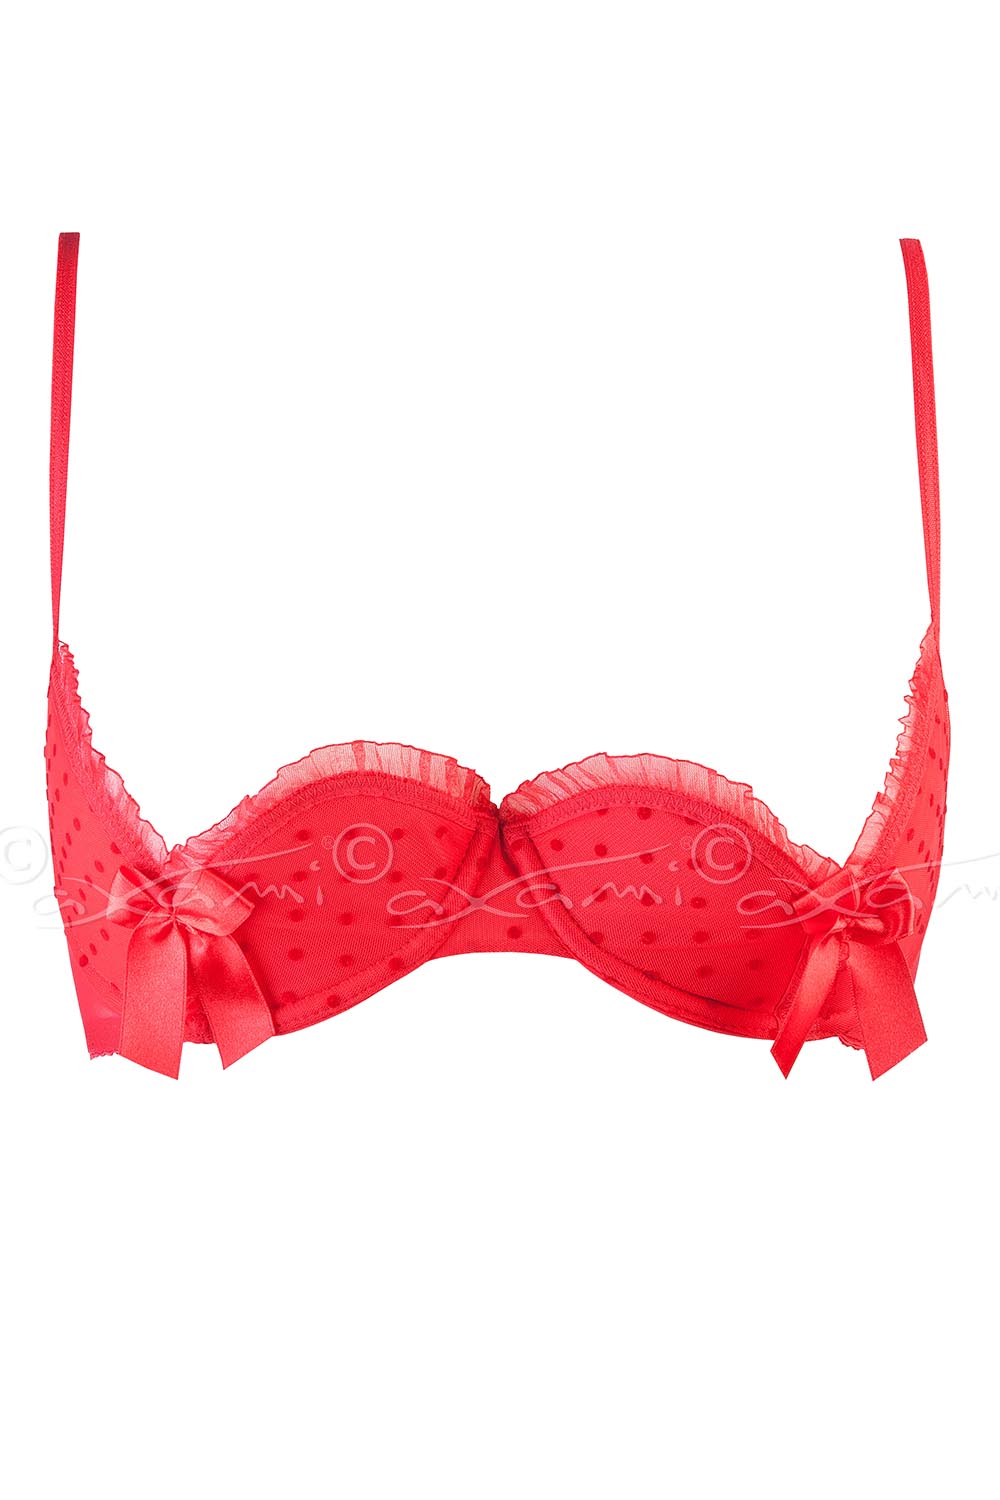 https://othereden.co.uk/eng_pl_Axami-V-5231-Notice-me-tempting-luxurious-sexy-open-cup-shelf-bra-made-in-EU-available-matching-thong-V-5238-and-garter-belt-V-5232-Red-13394_1.jpg